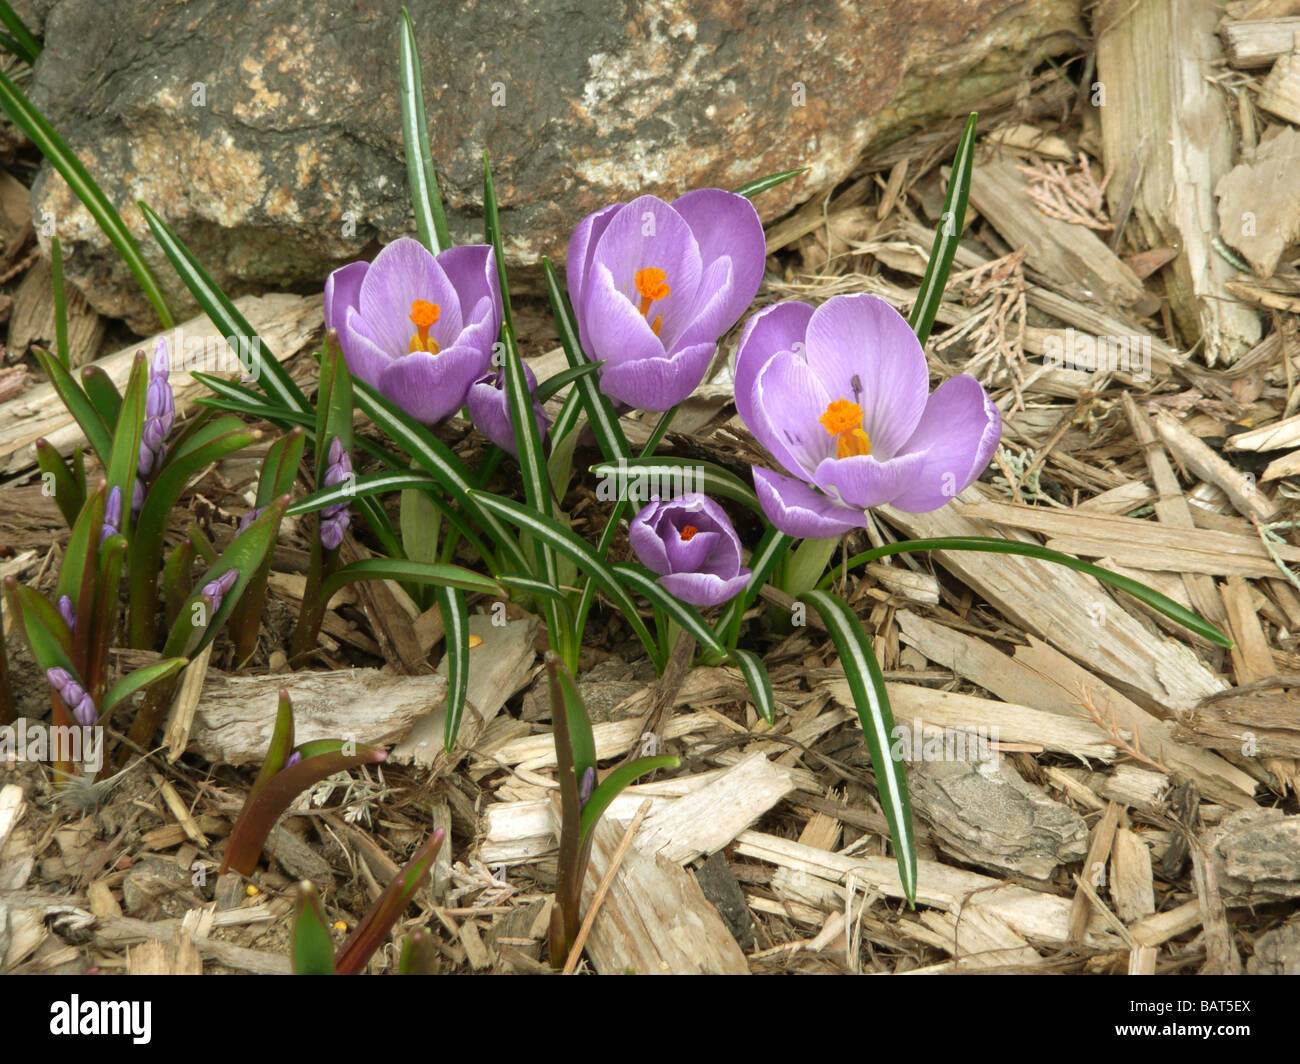 A bunch of purple crocus with orange stamens in a garden bed of wood chips.  Flowers are next to a rock. Stock Photo